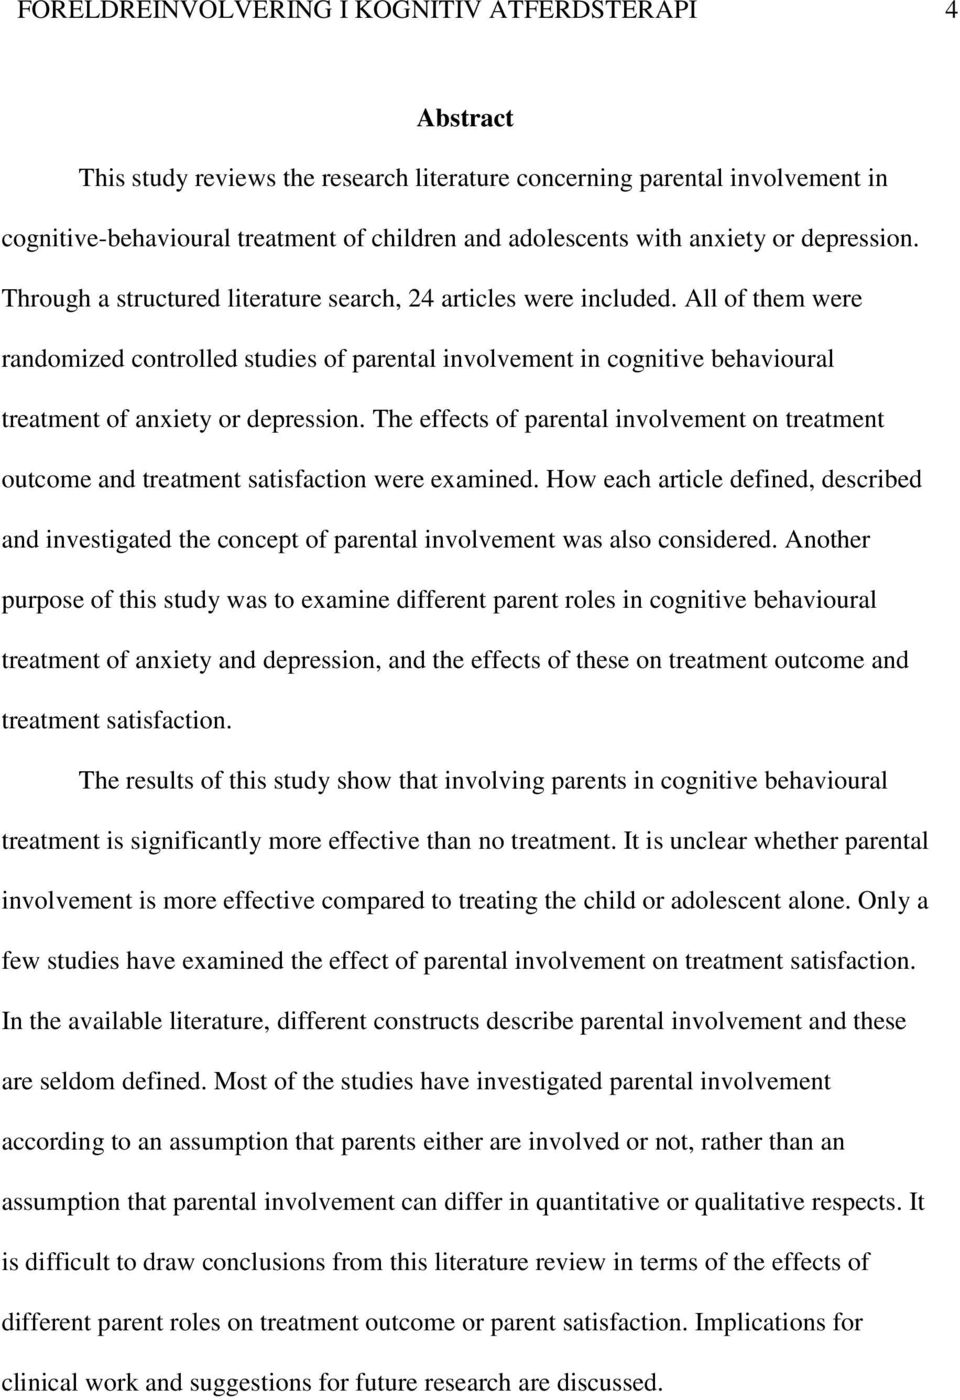 The effects of parental involvement on treatment outcome and treatment satisfaction were examined.